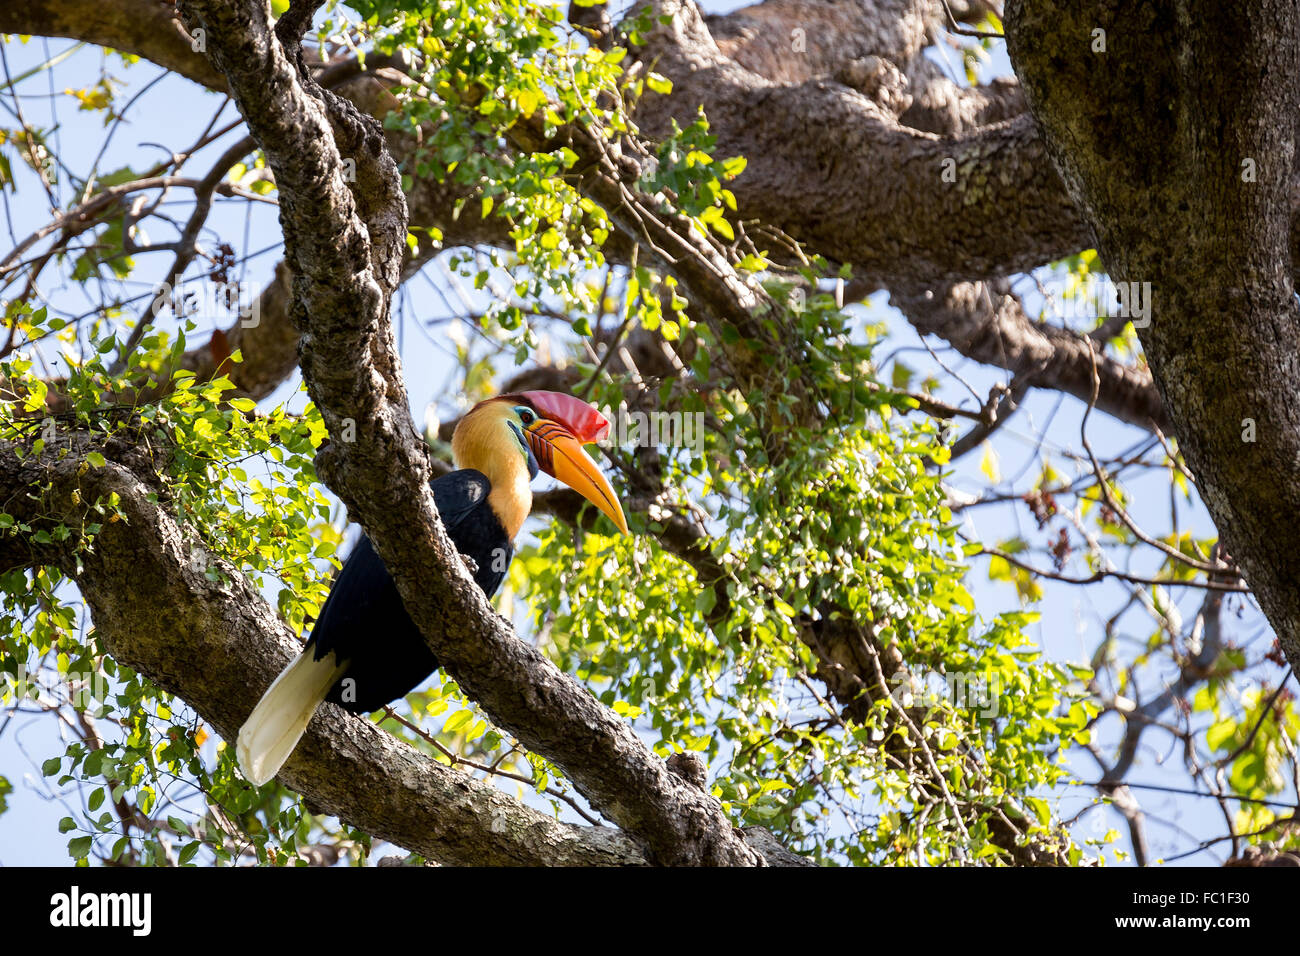 Knobbed hornbill, Aceros cassidix, on the branch at a tree top. Tangkoko National Park, Sulawesi, Indonesia Stock Photo